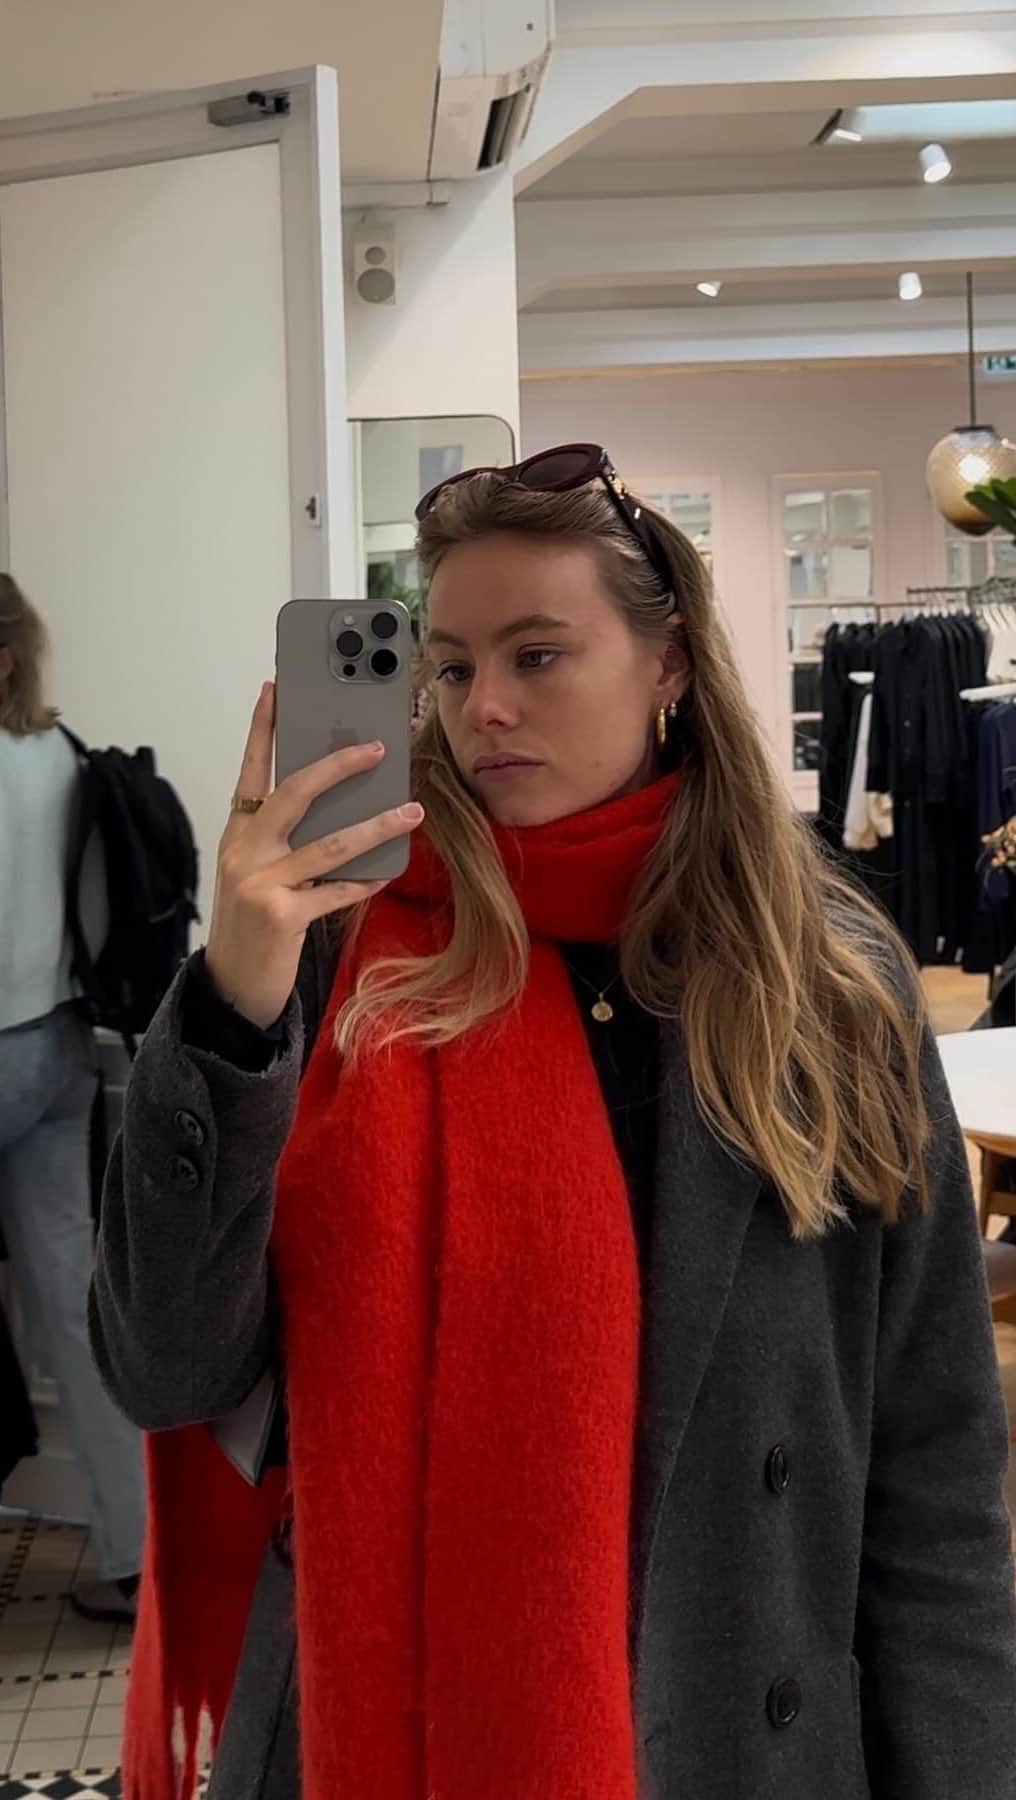 Annabel Smitのインスタグラム：「🍒❤️🌶️🍓🌹🍷🍎 add a pop of red to your outfits this fall/winter  #red #inspo #fashioninspo #outfits #outfitinspo #style #fashion #fallfashion」